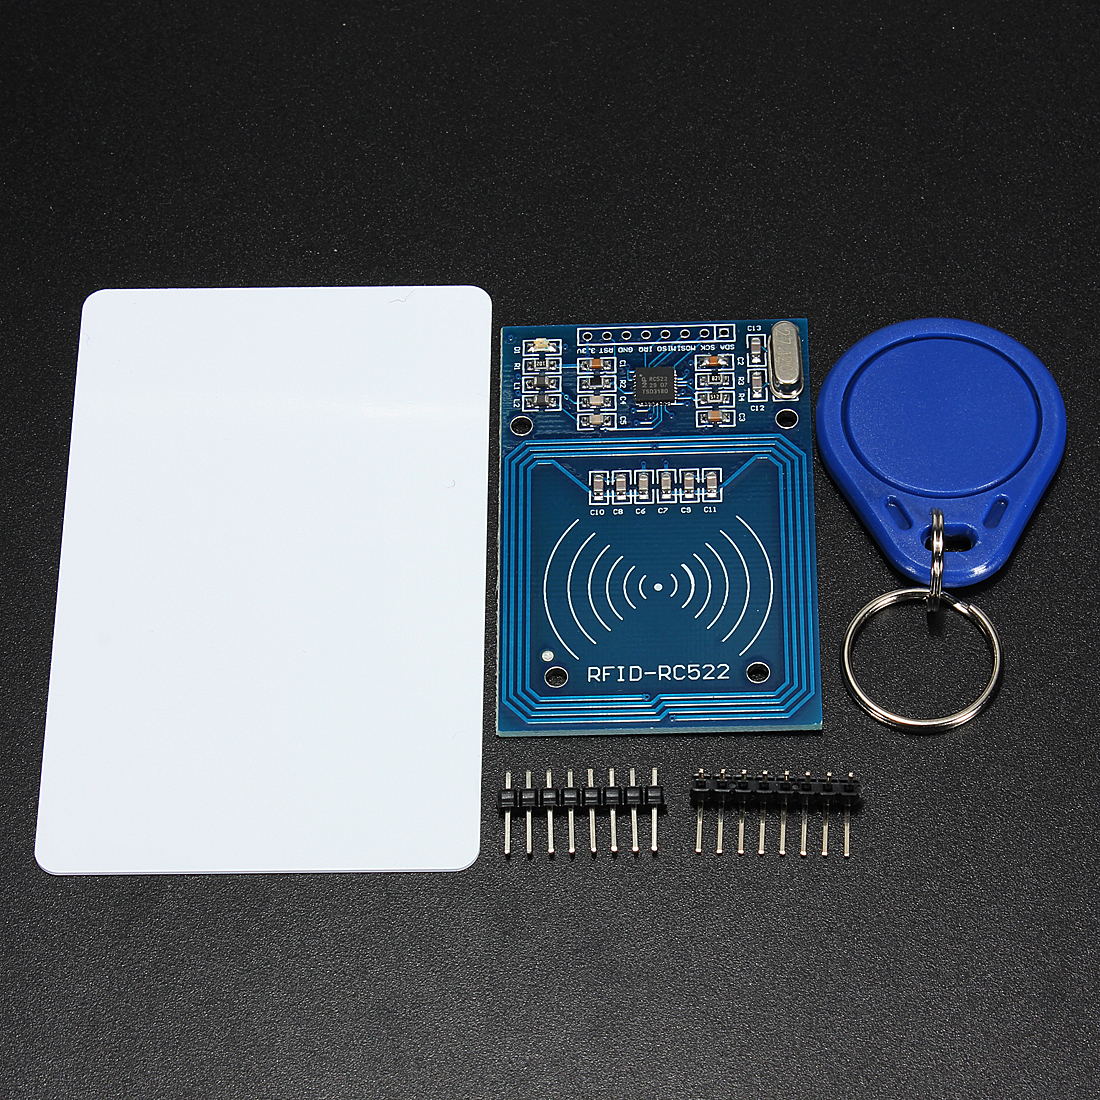 33V-RC522-Chip-IC-Card-Induction-Module-RFID-Reader-1356MHz-10Mbits-81067-1